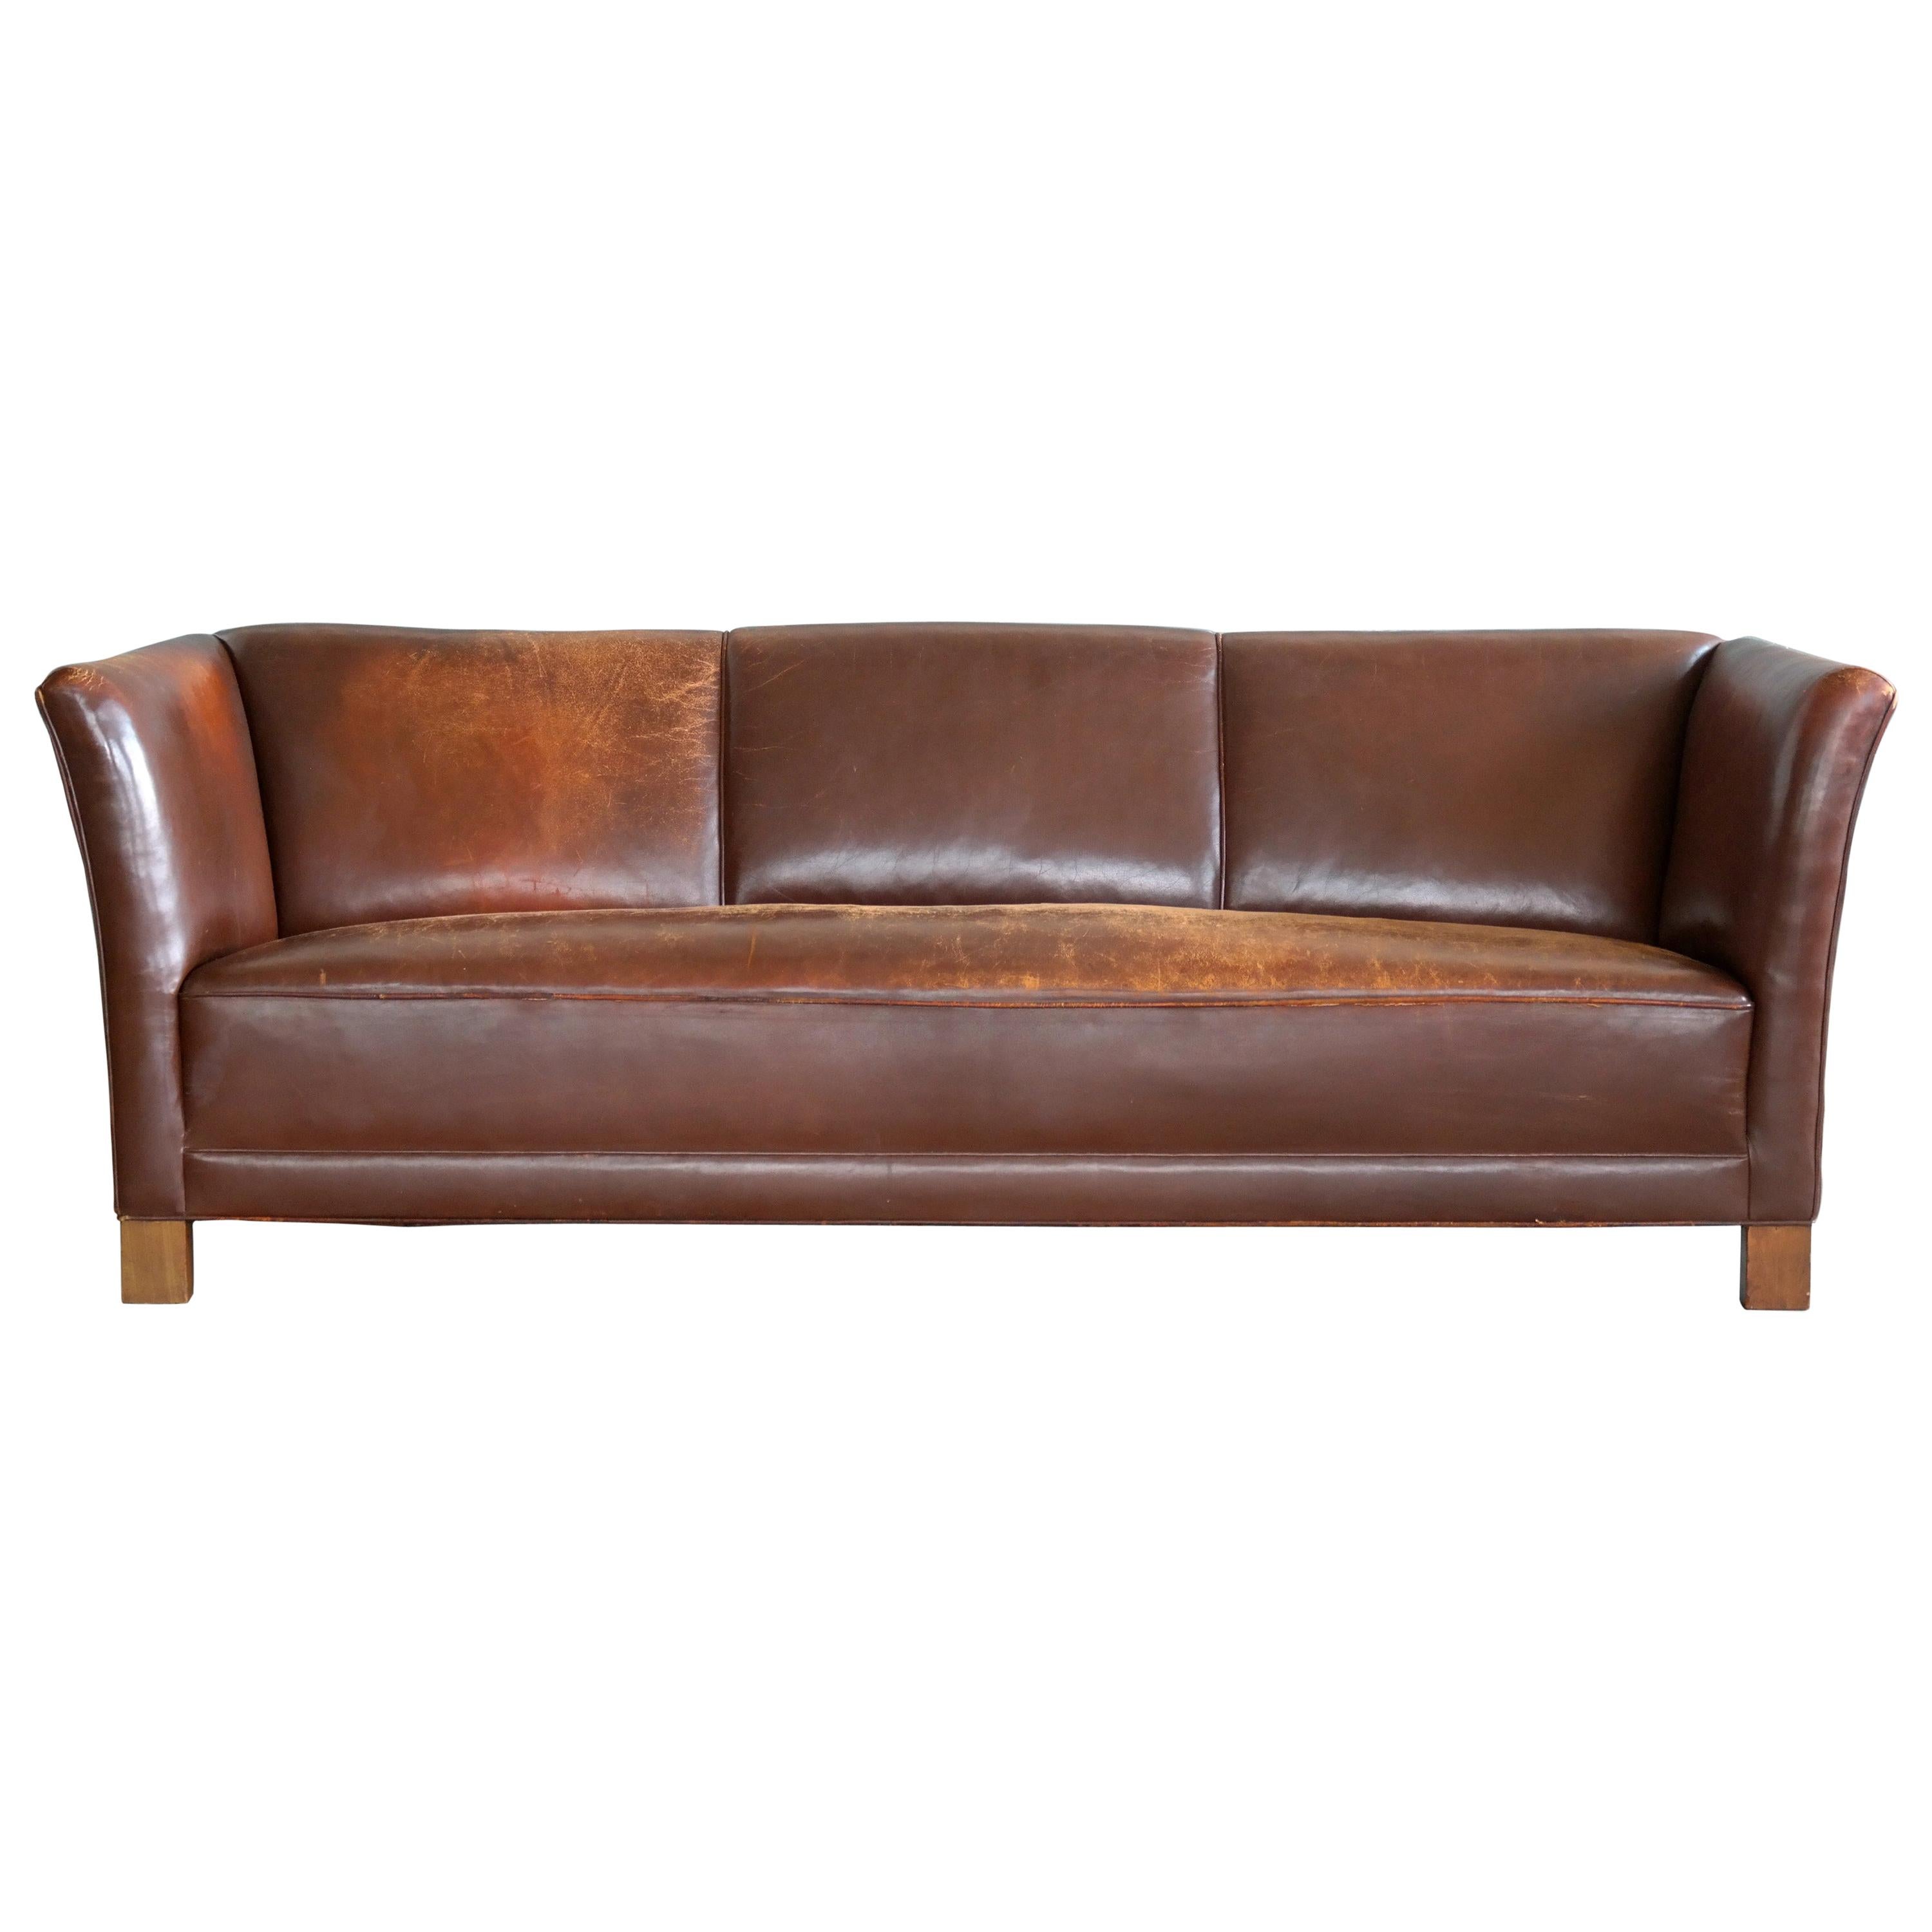 Early Midcentury Club Sofa by Fritz Hansen in Chestnut Brown Worn Leather